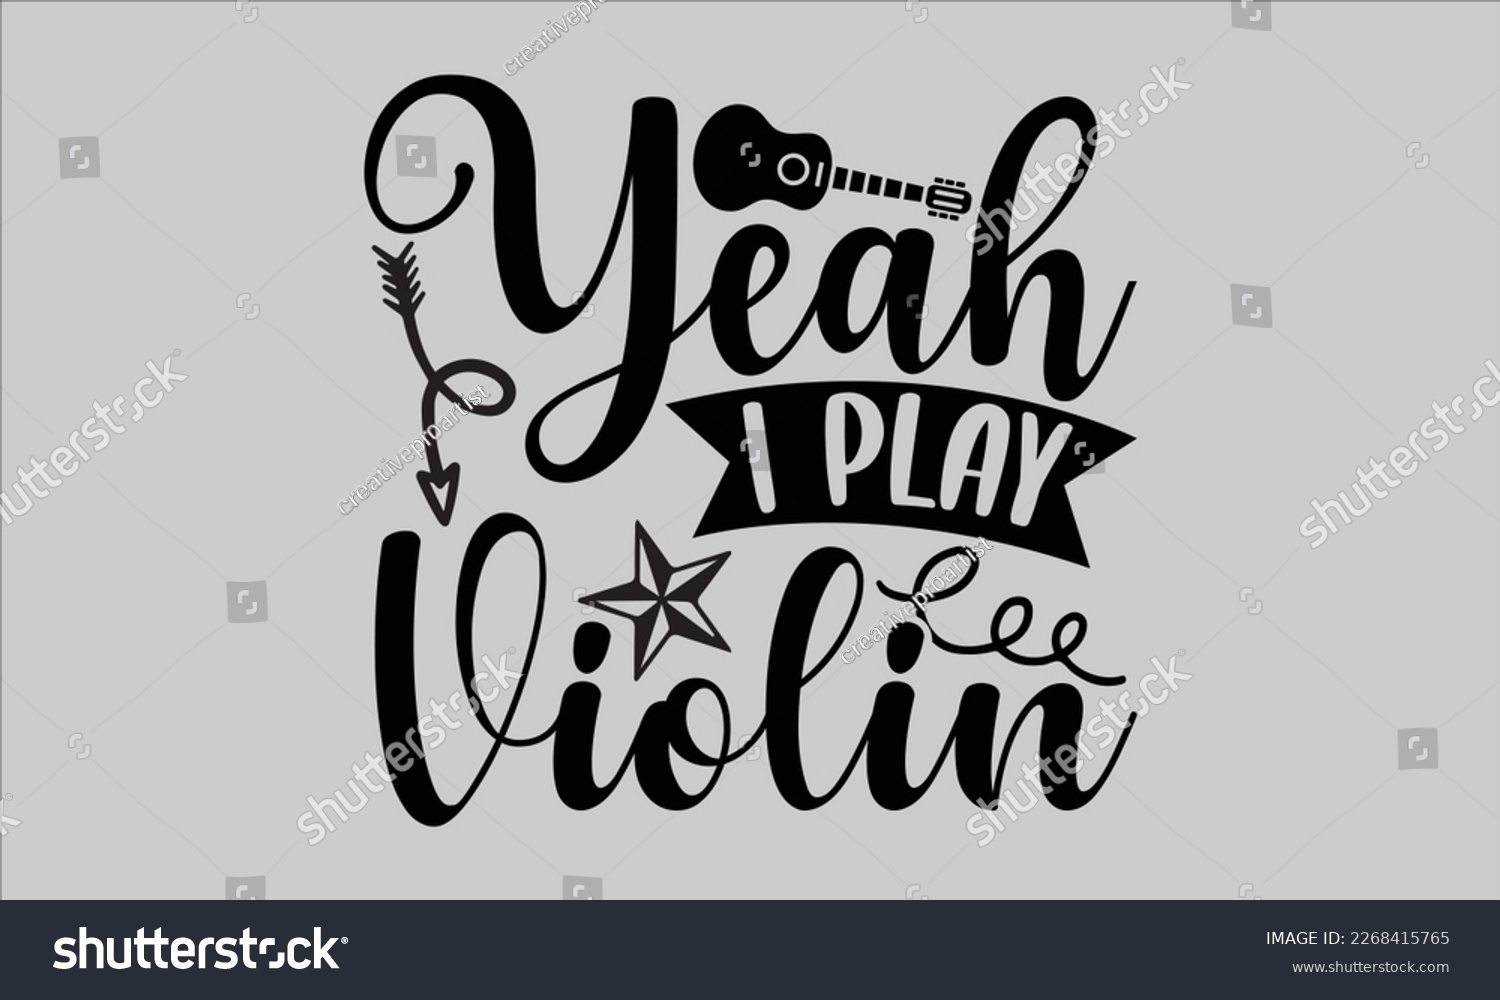 SVG of Yeah I play violin- Piano t- shirt design, Template Vector and Sports illustration, lettering on a white background for svg Cutting Machine, posters mog, bags eps 10. svg